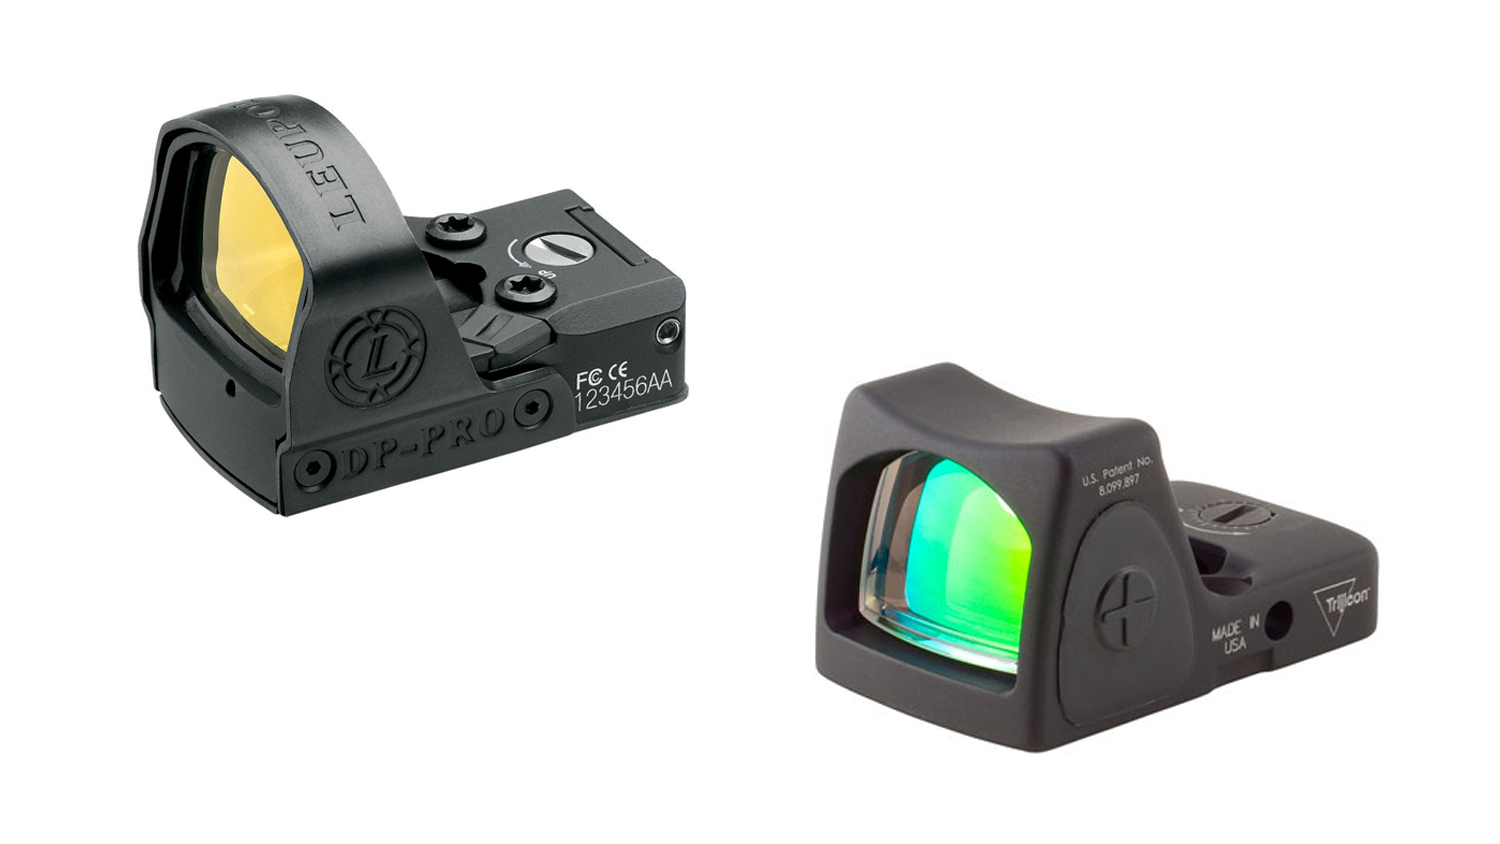 Popular USPSA Carry Optics sights: Leupold DeltaPoint Pro and Trijicon RMR